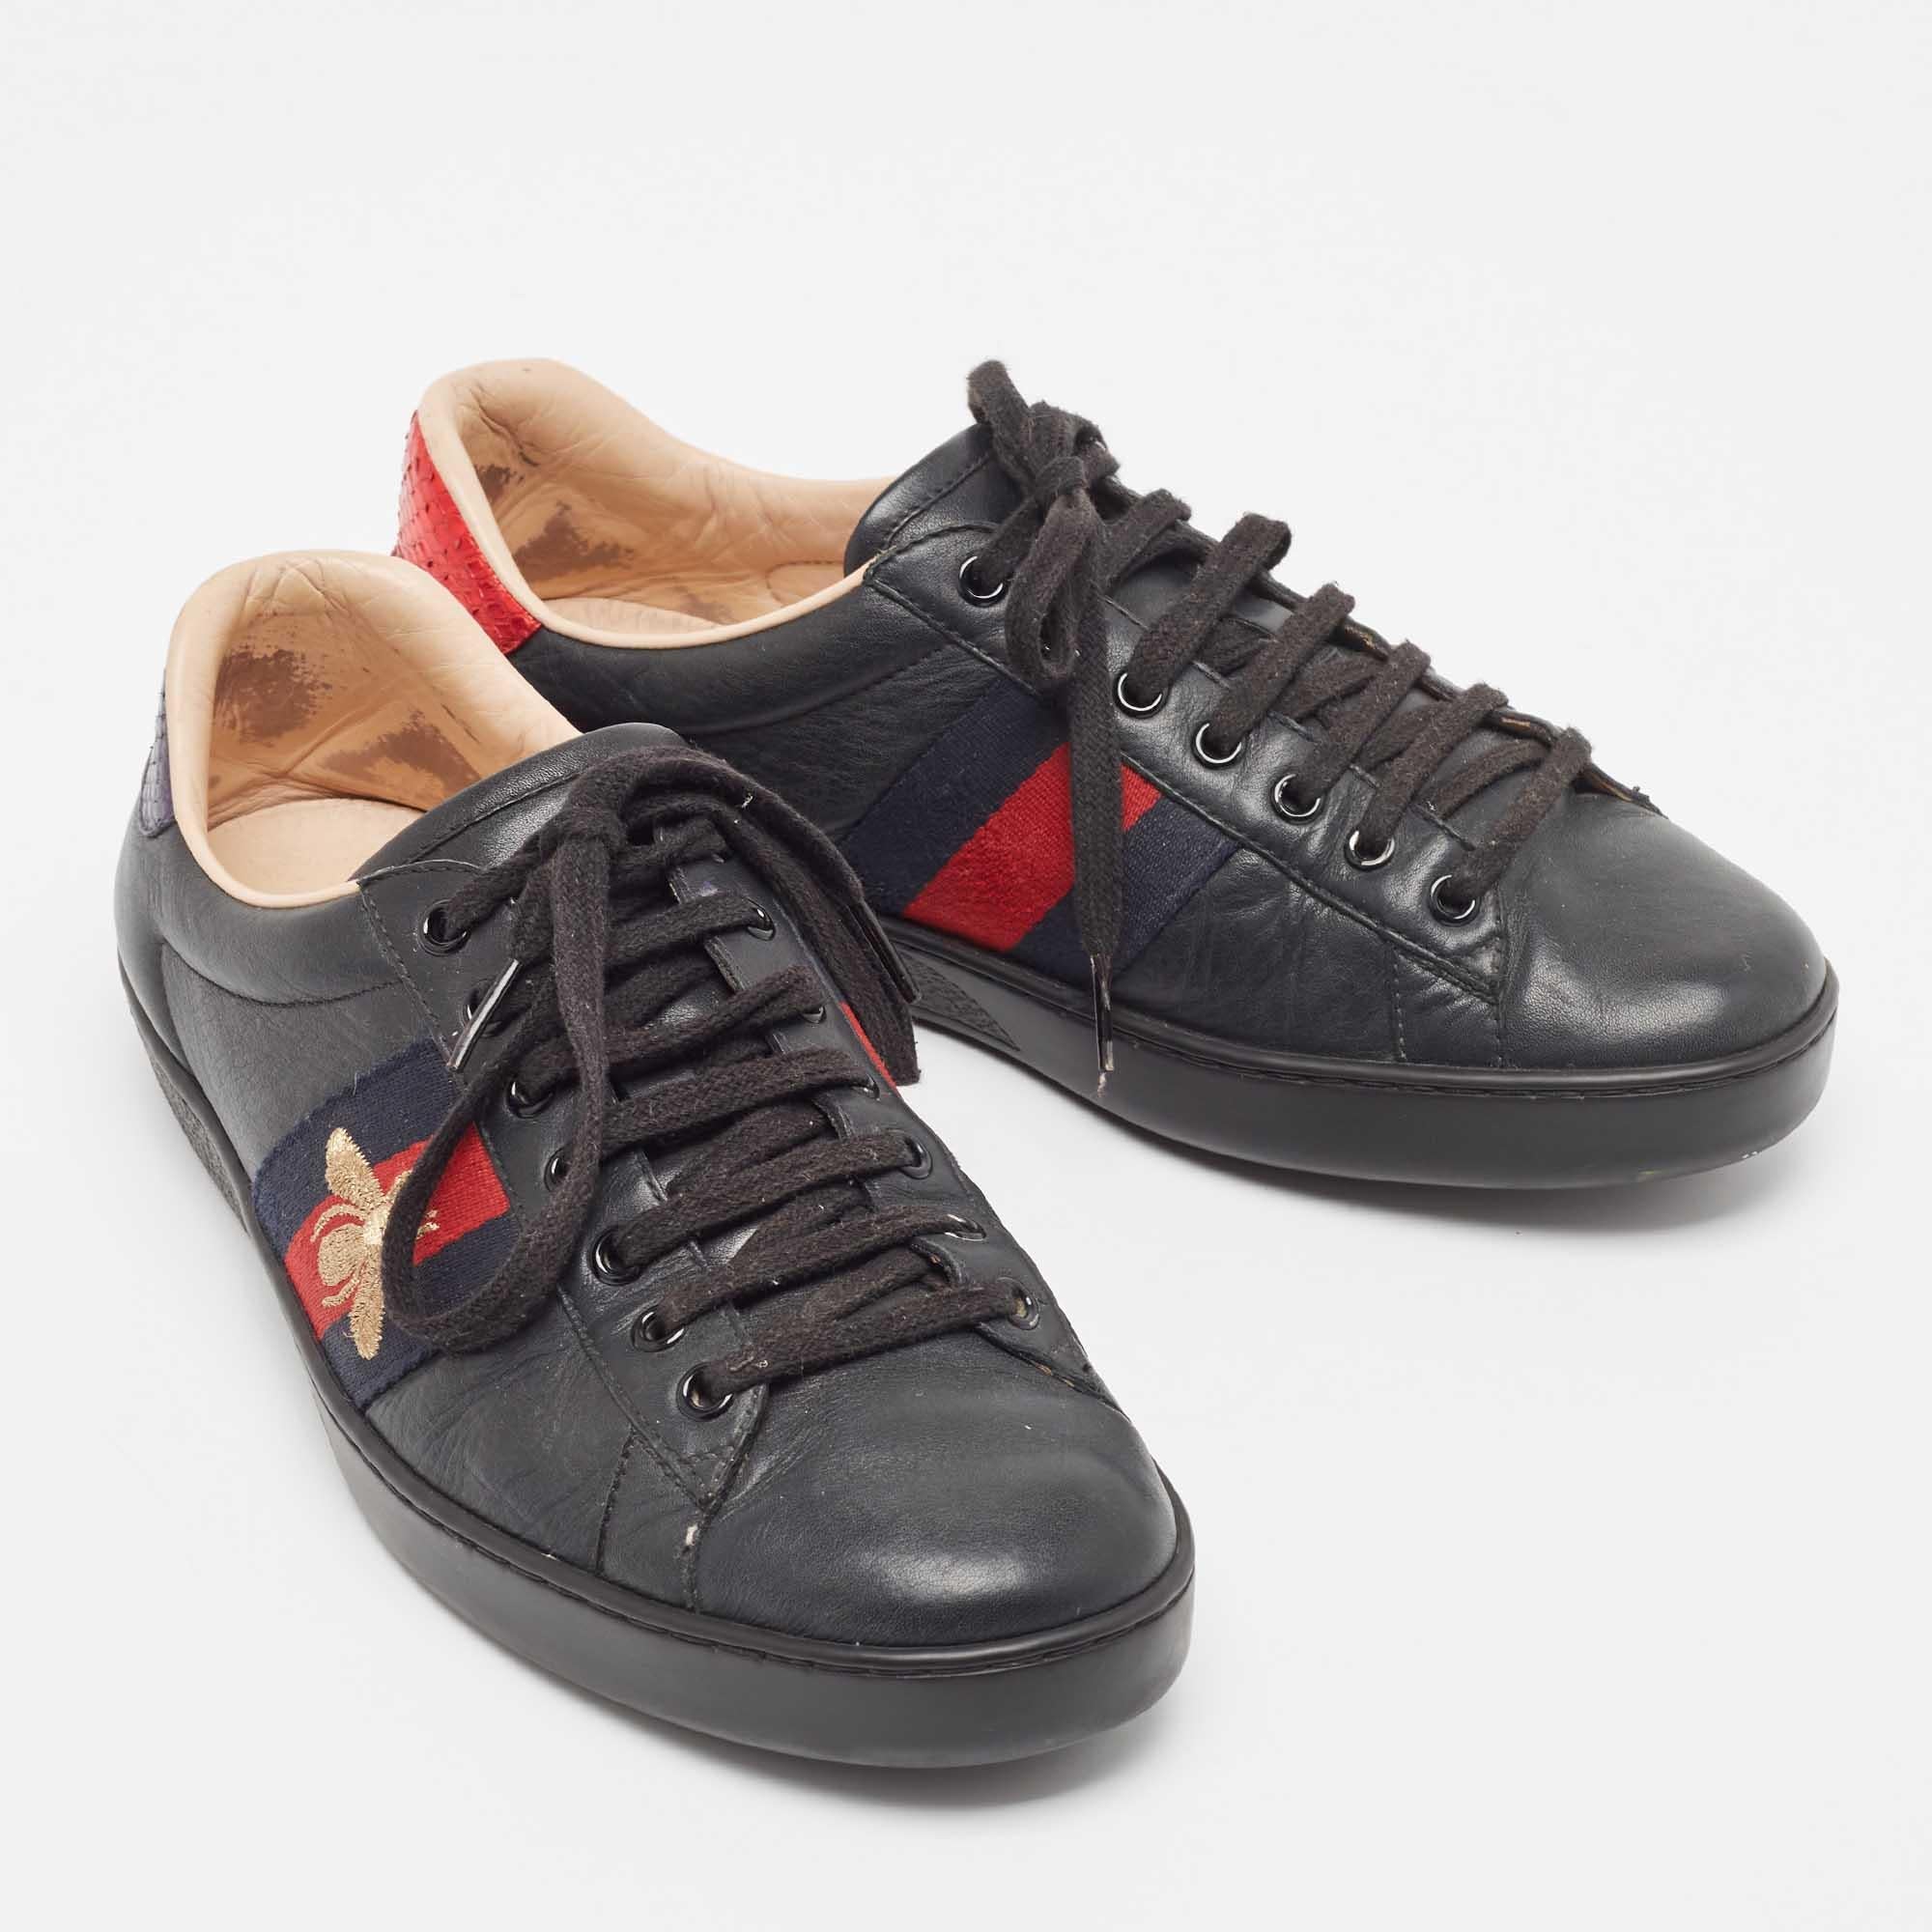 Gucci Black Leather Embroidered Bee Ace Sneakers Size 41.5 In Good Condition For Sale In Dubai, Al Qouz 2